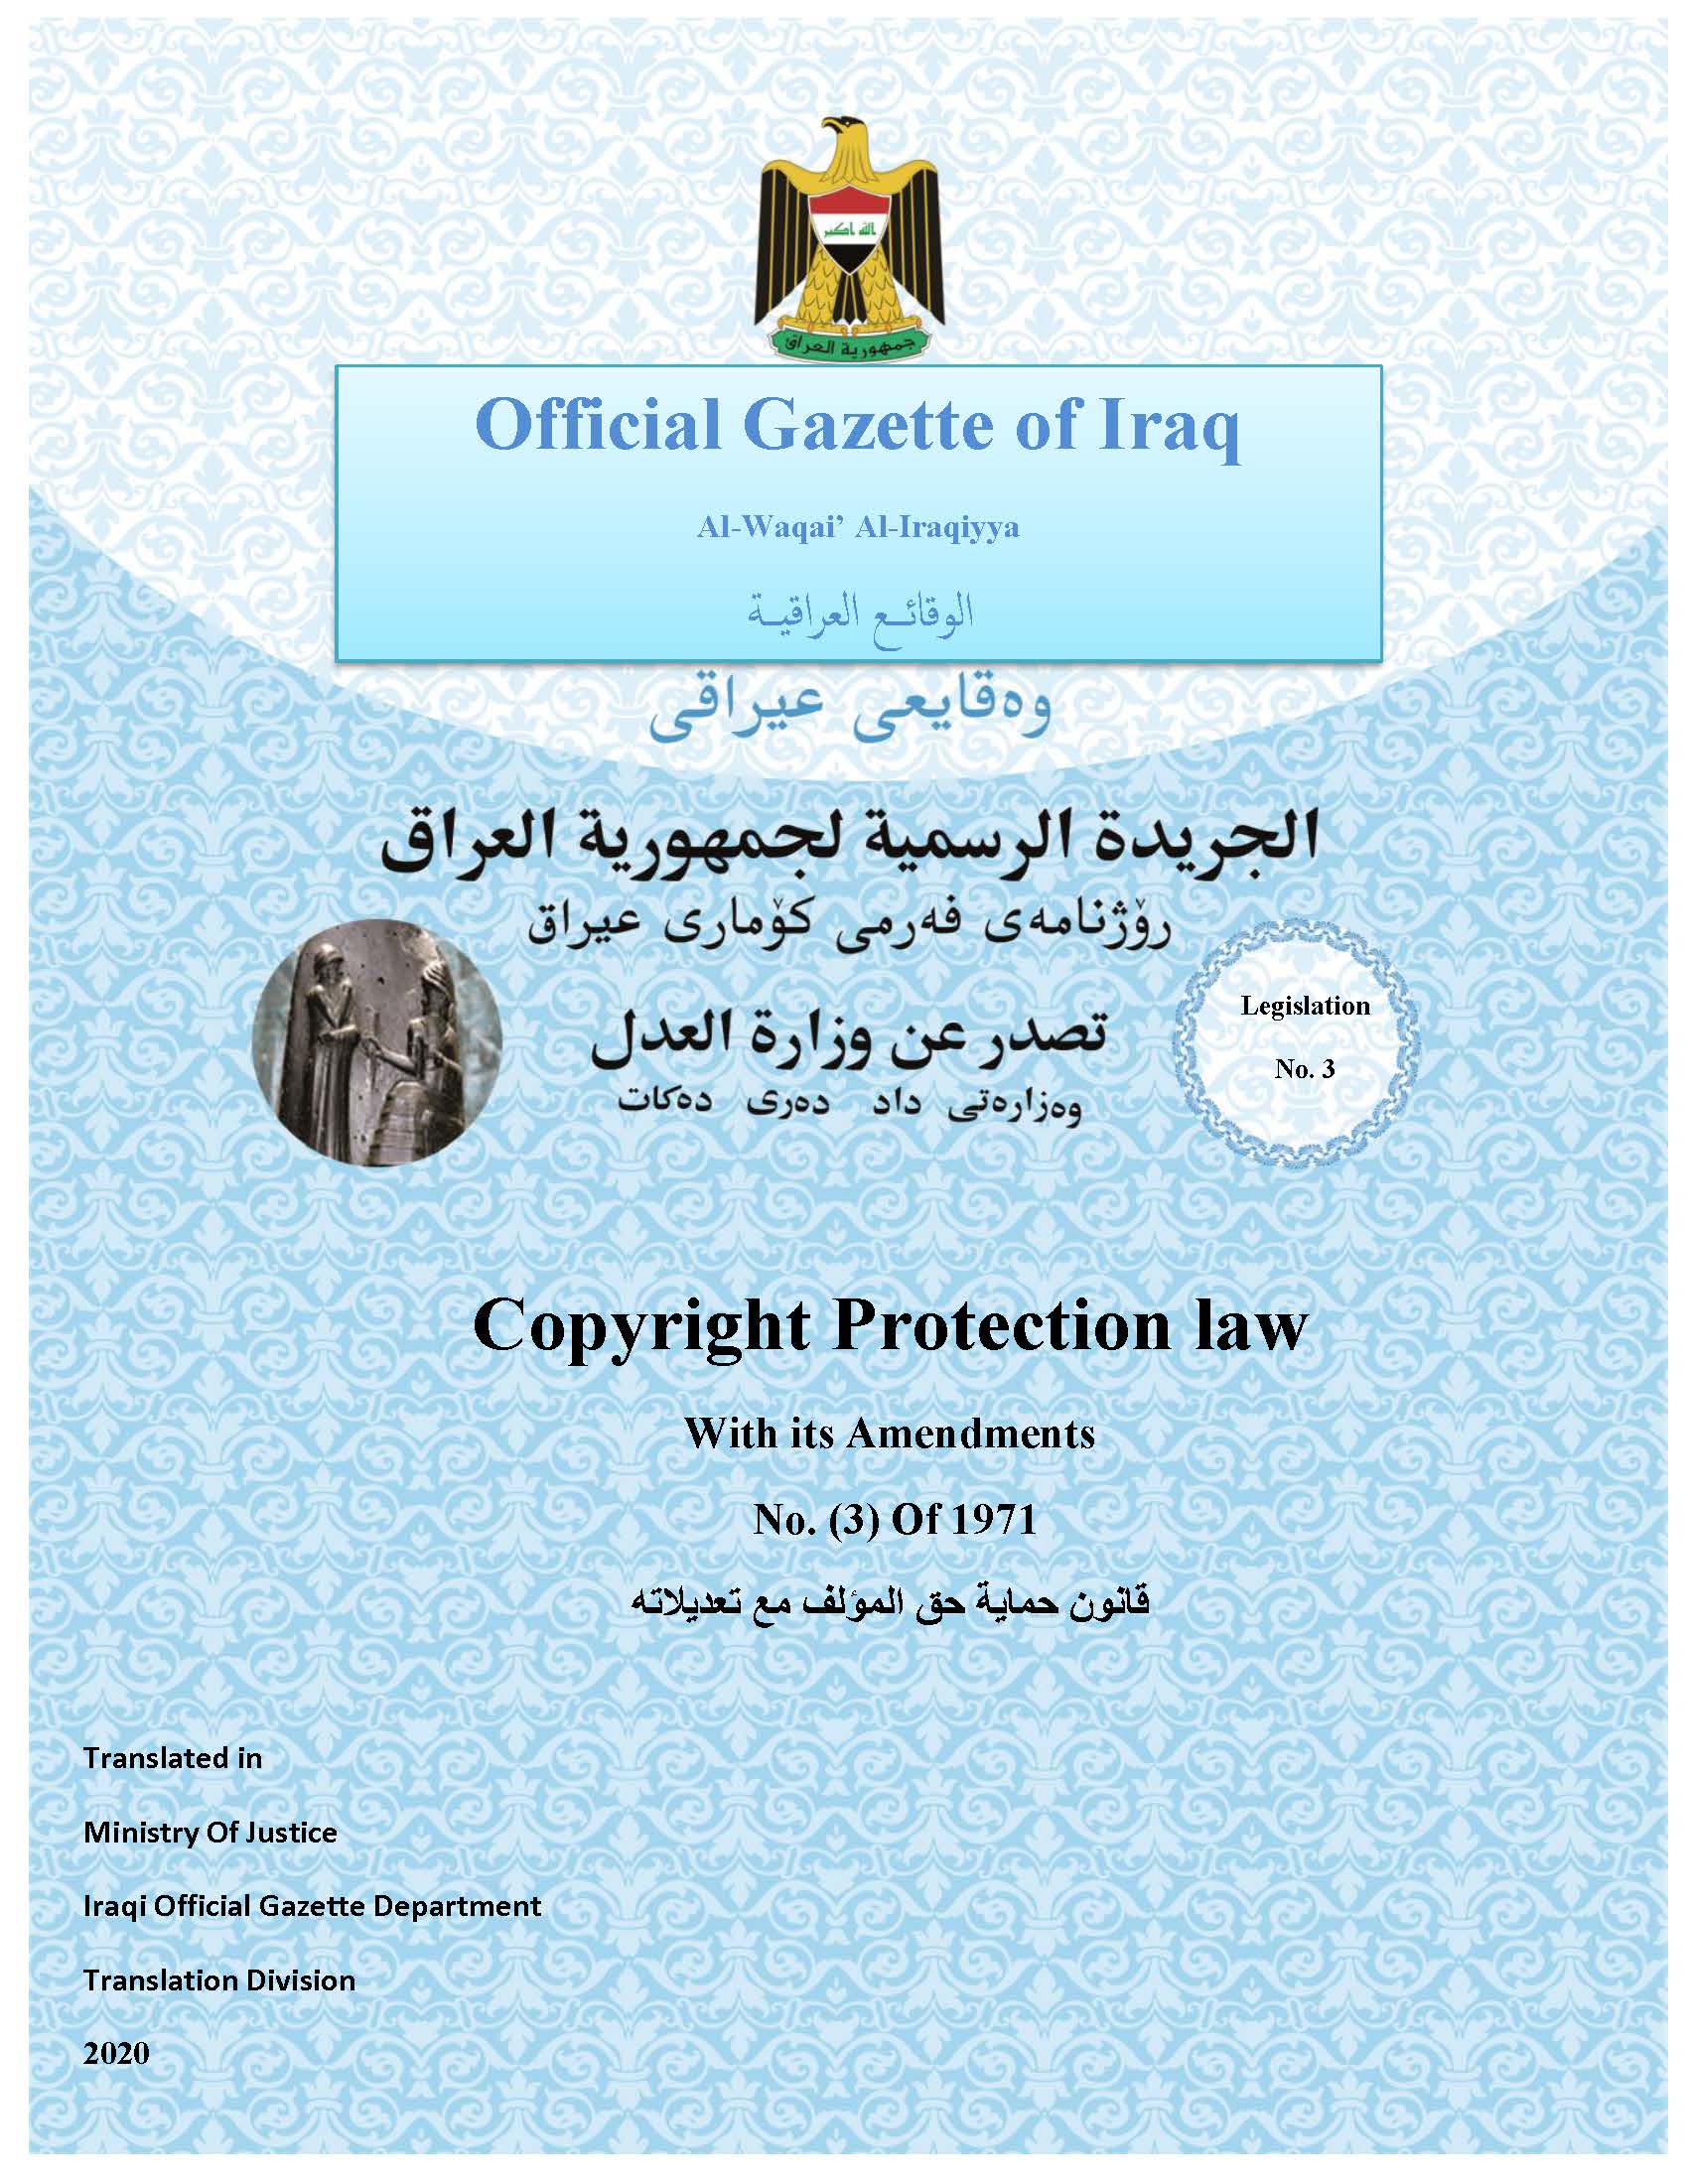 Copyright Protection Law With its Amendments No.(3) Of 1971 